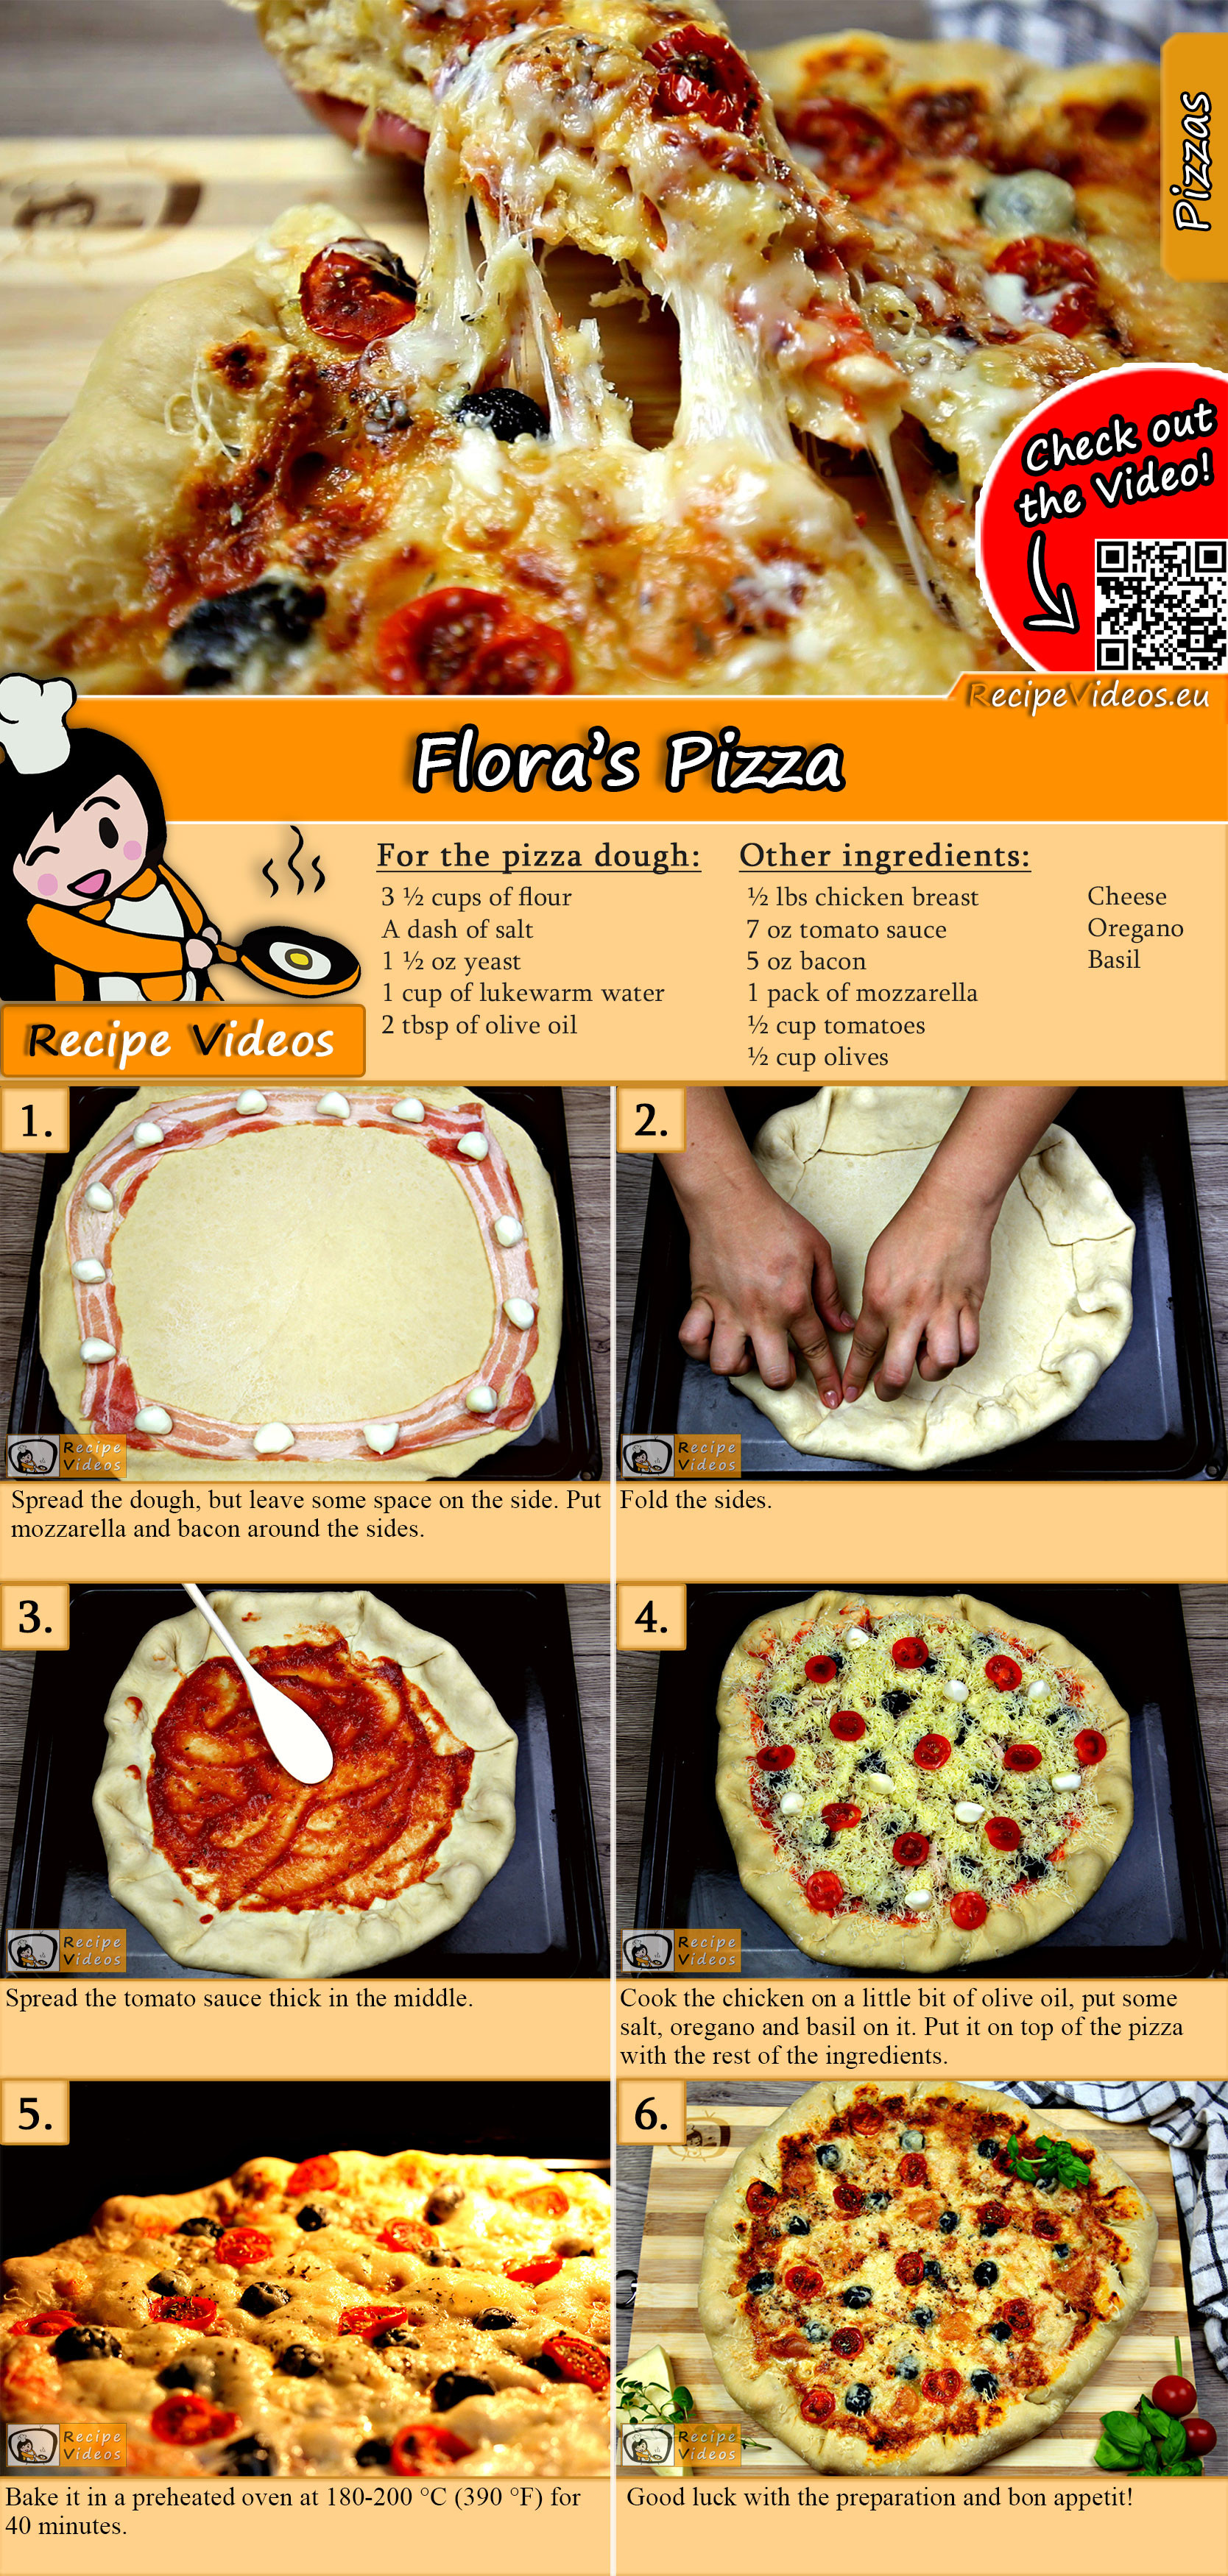 Flora’s pizza recipe with video